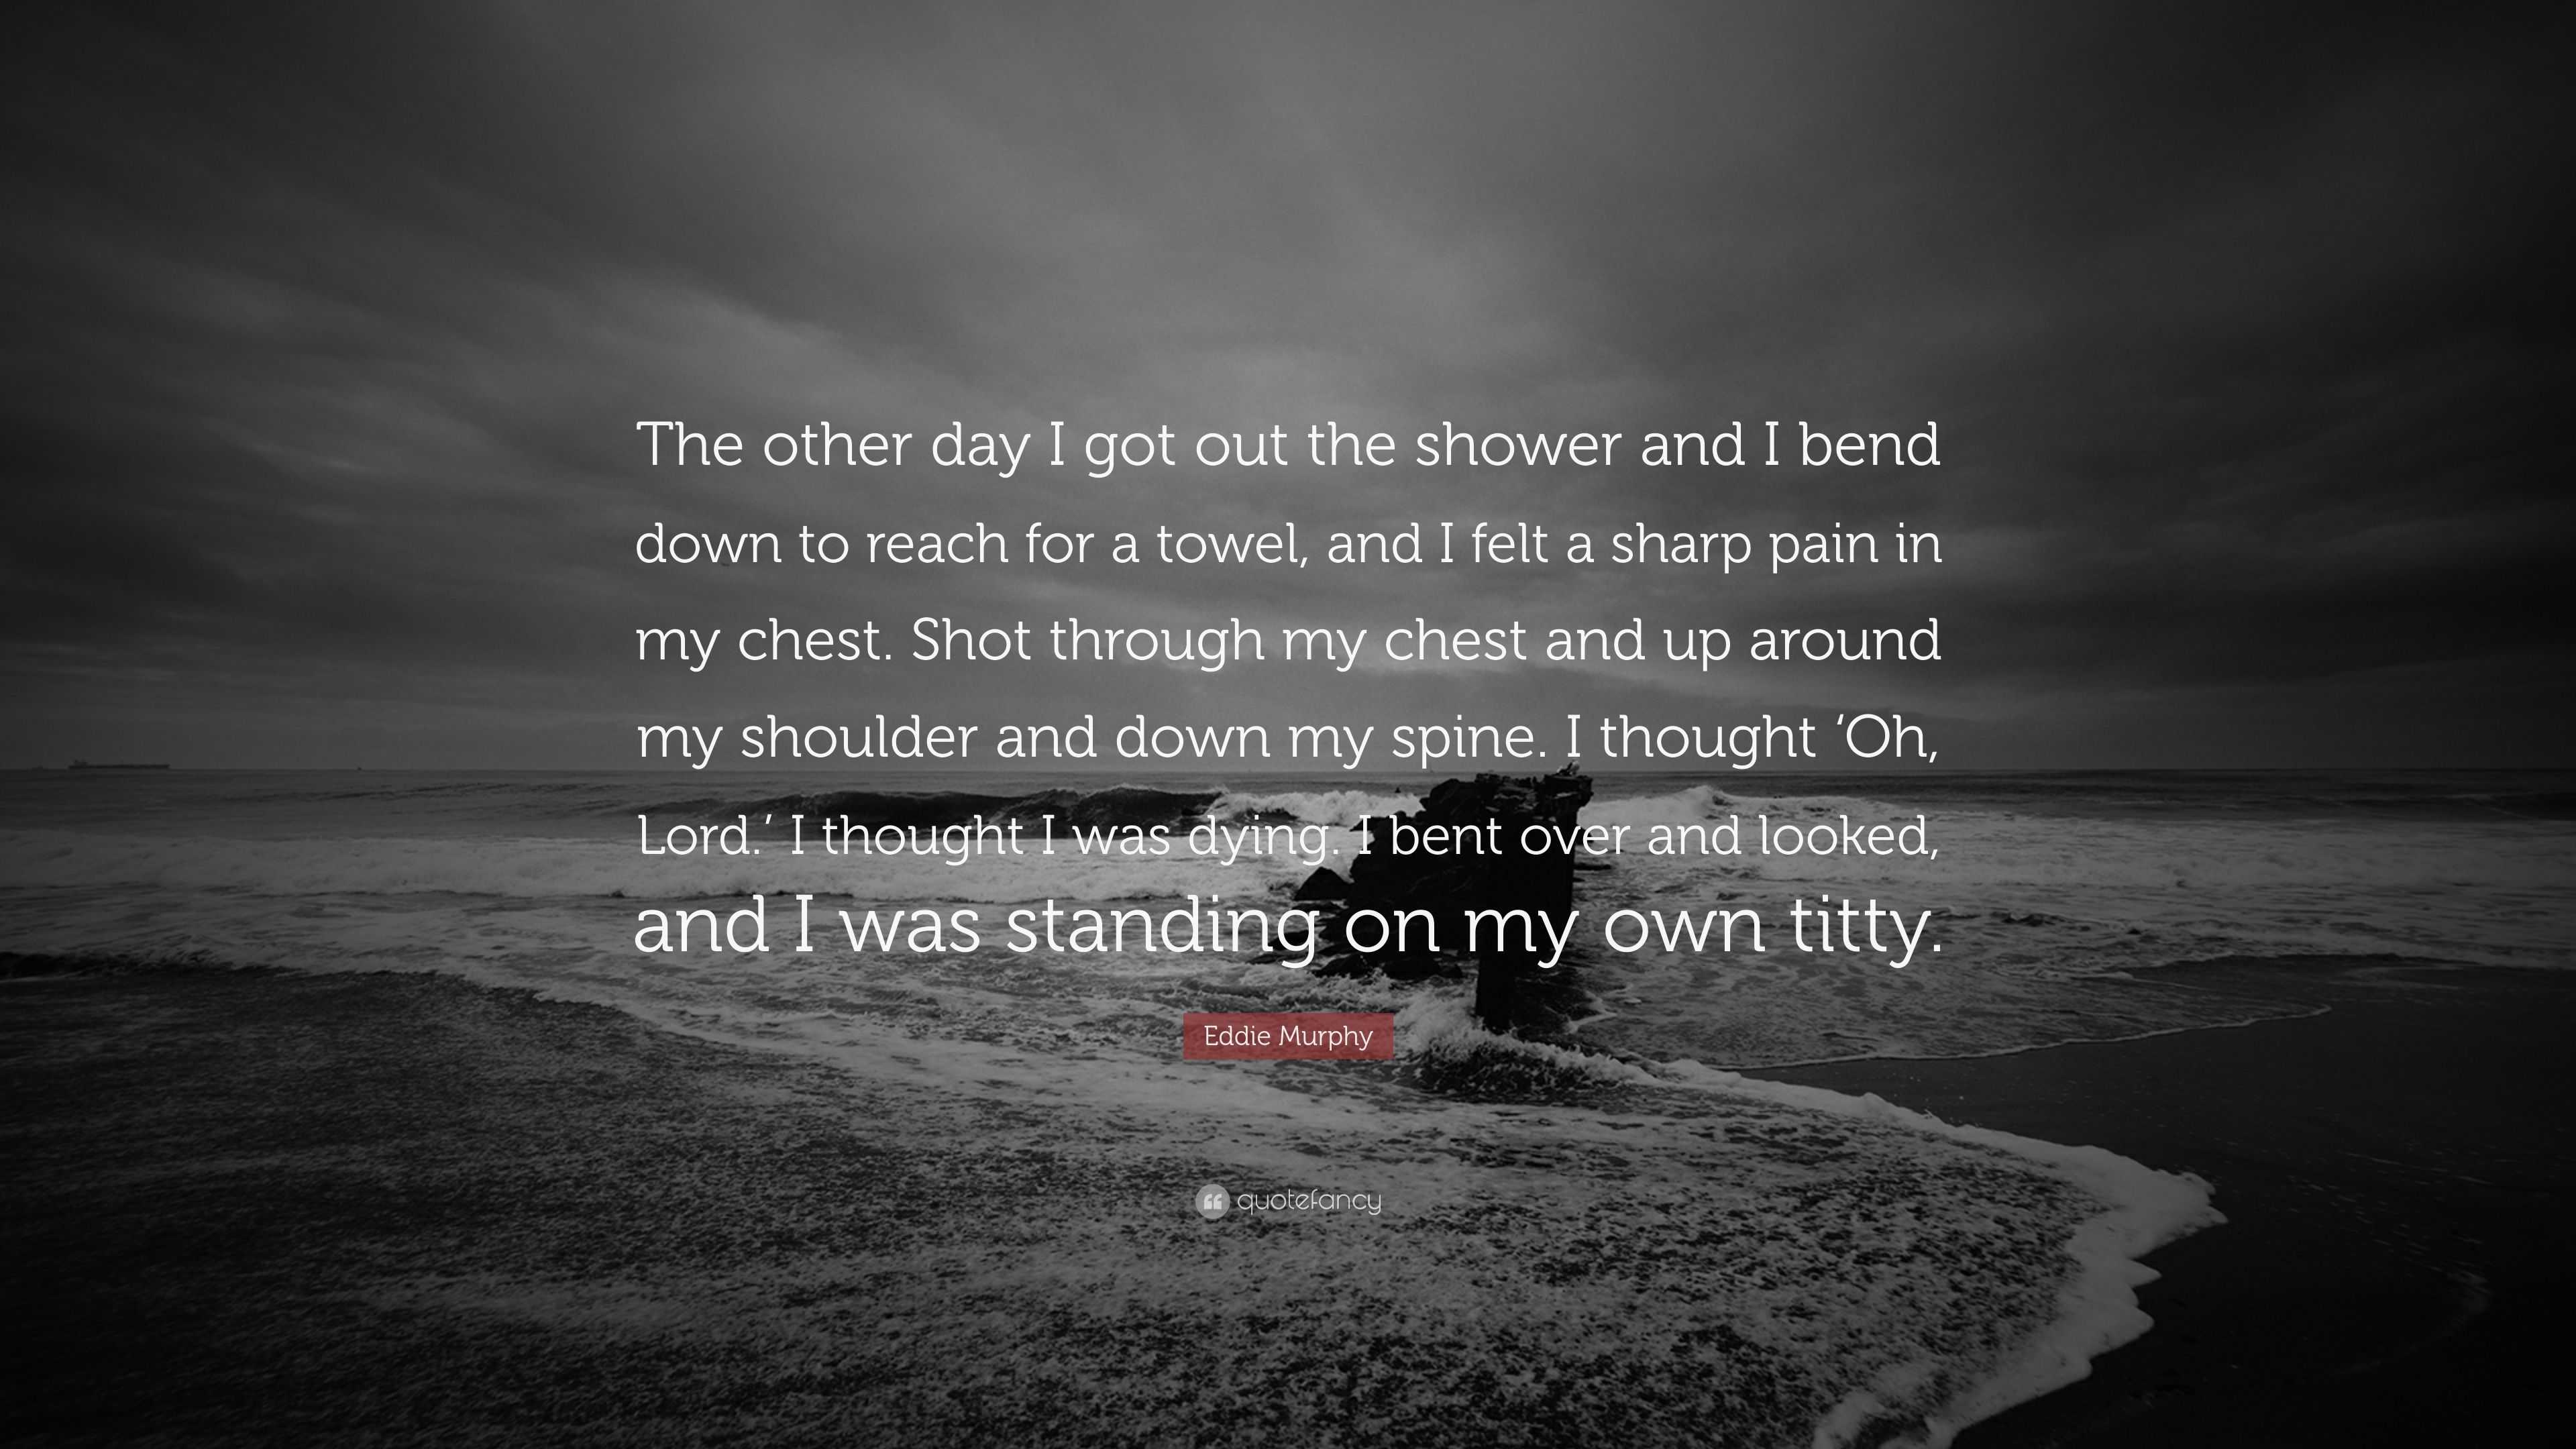 Eddie Murphy Quote: “The other day I got out the shower and I bend